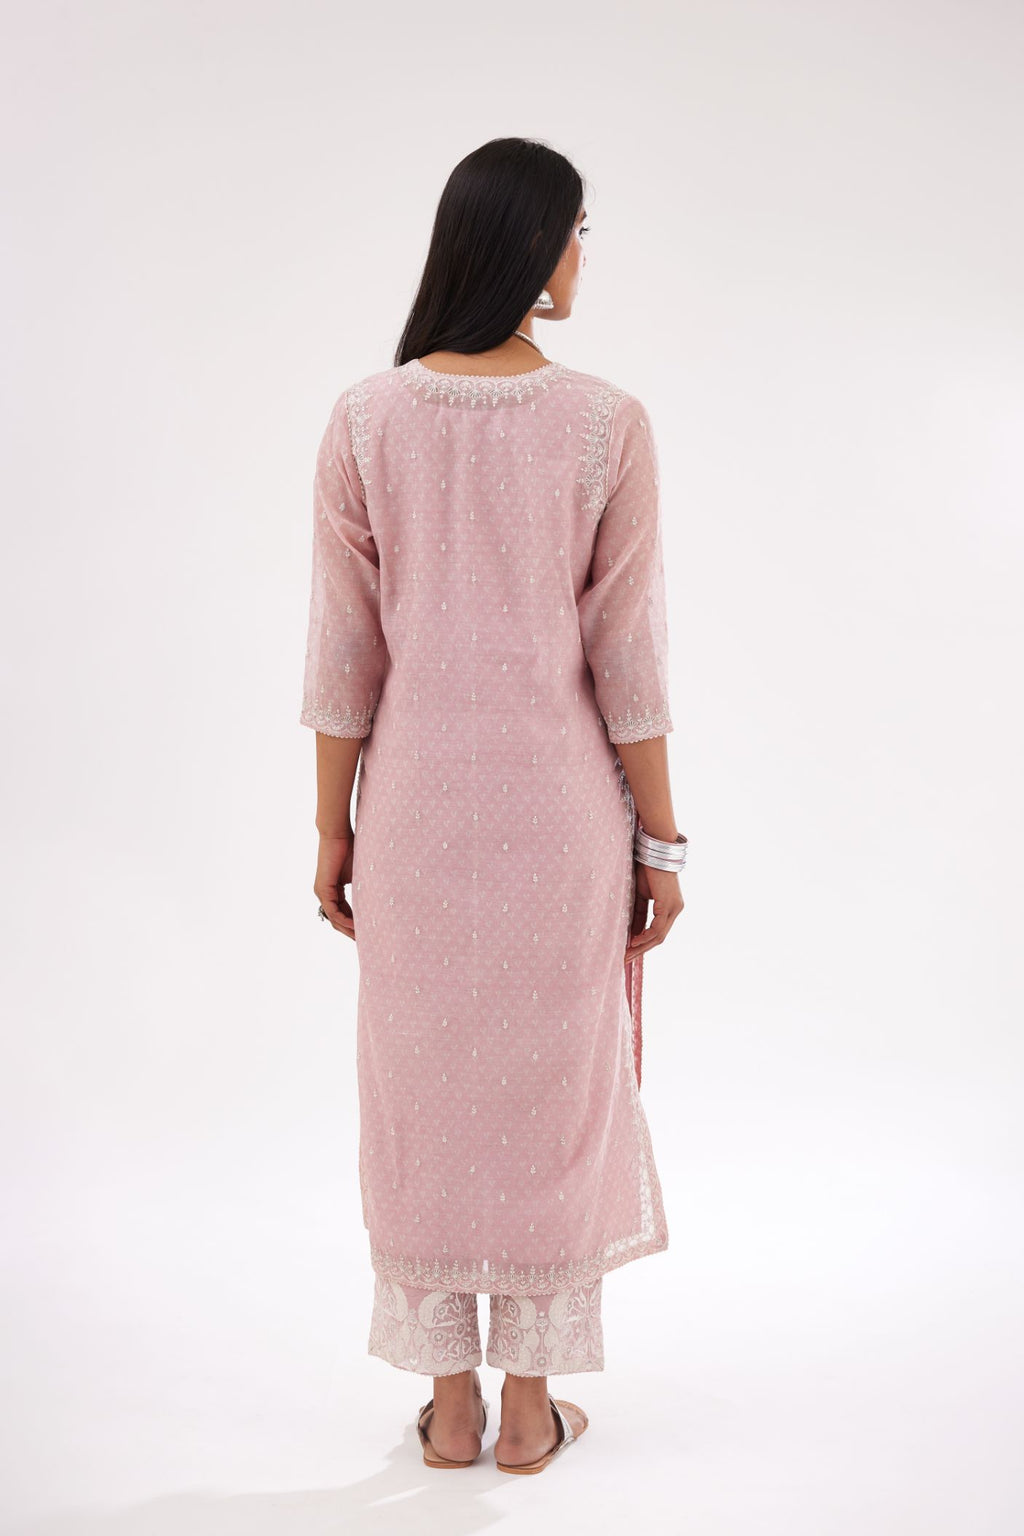 Pink cotton chanderi hand block printed kurta set with dori and silk thread embroidery at the neck, armholes, hem and sleeve cuffs.